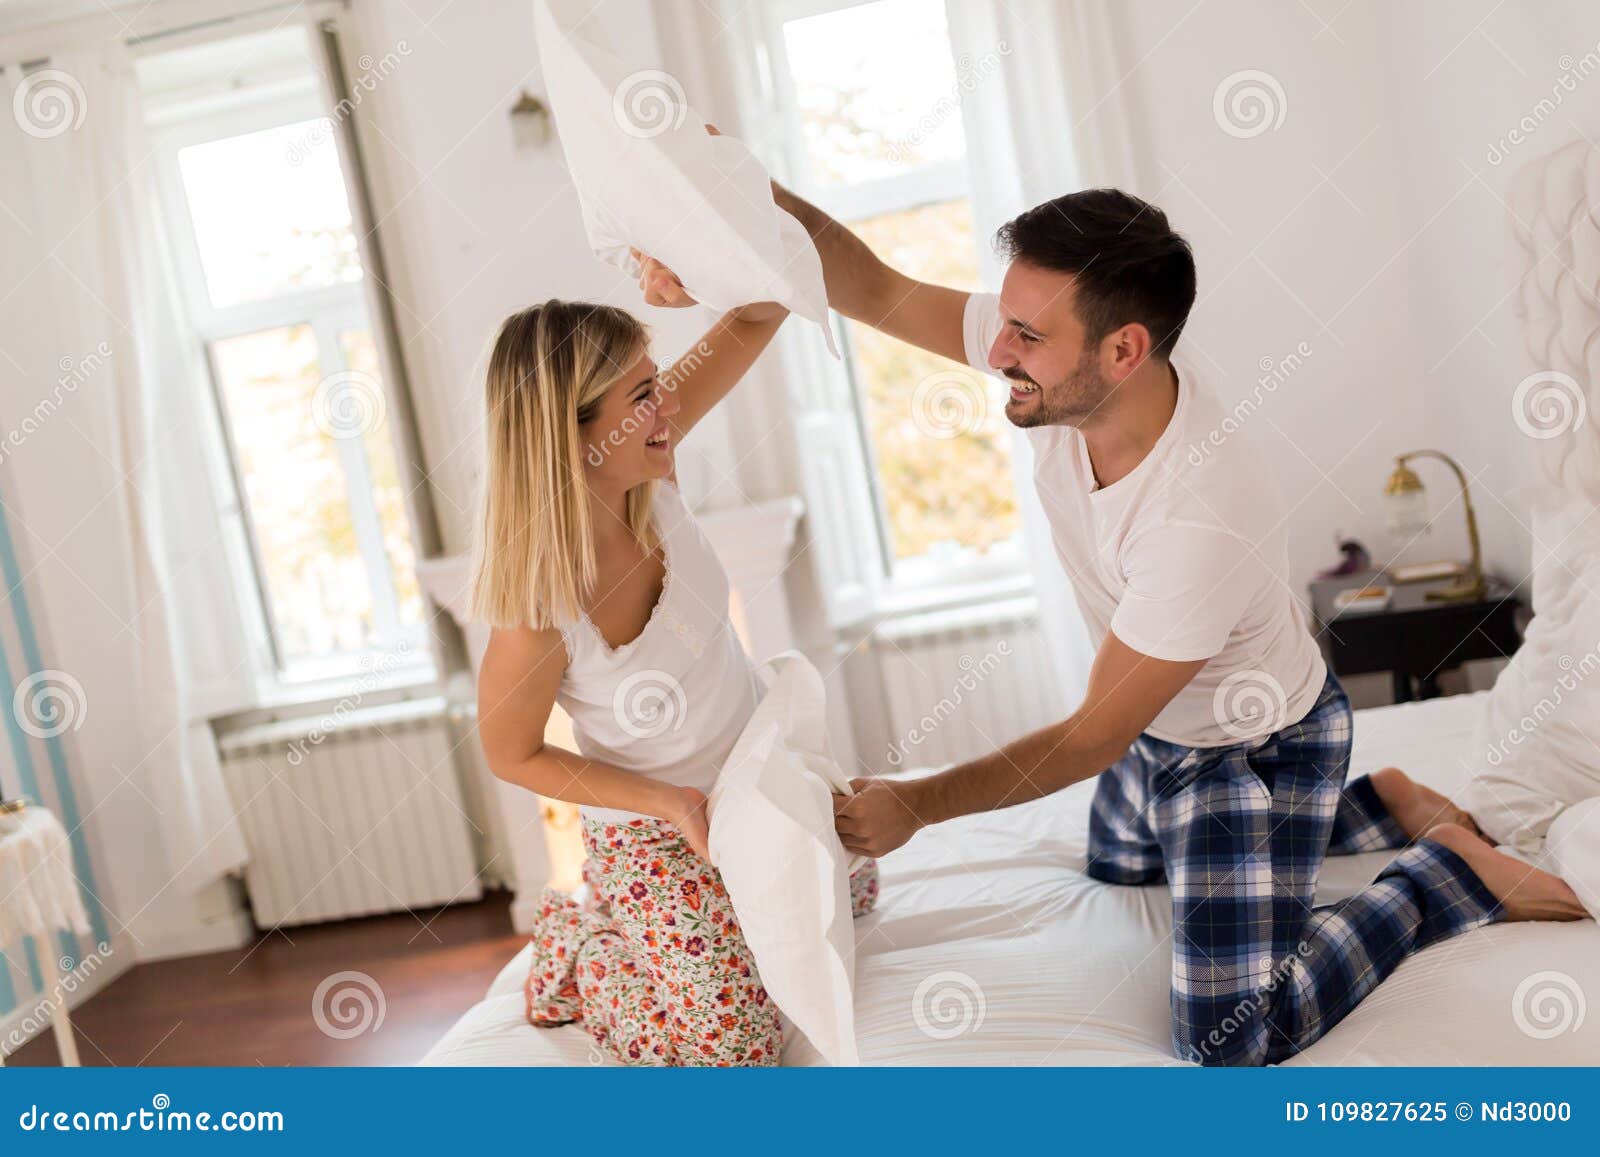 Young Couple Having Having Romantic Times In Bedroom St